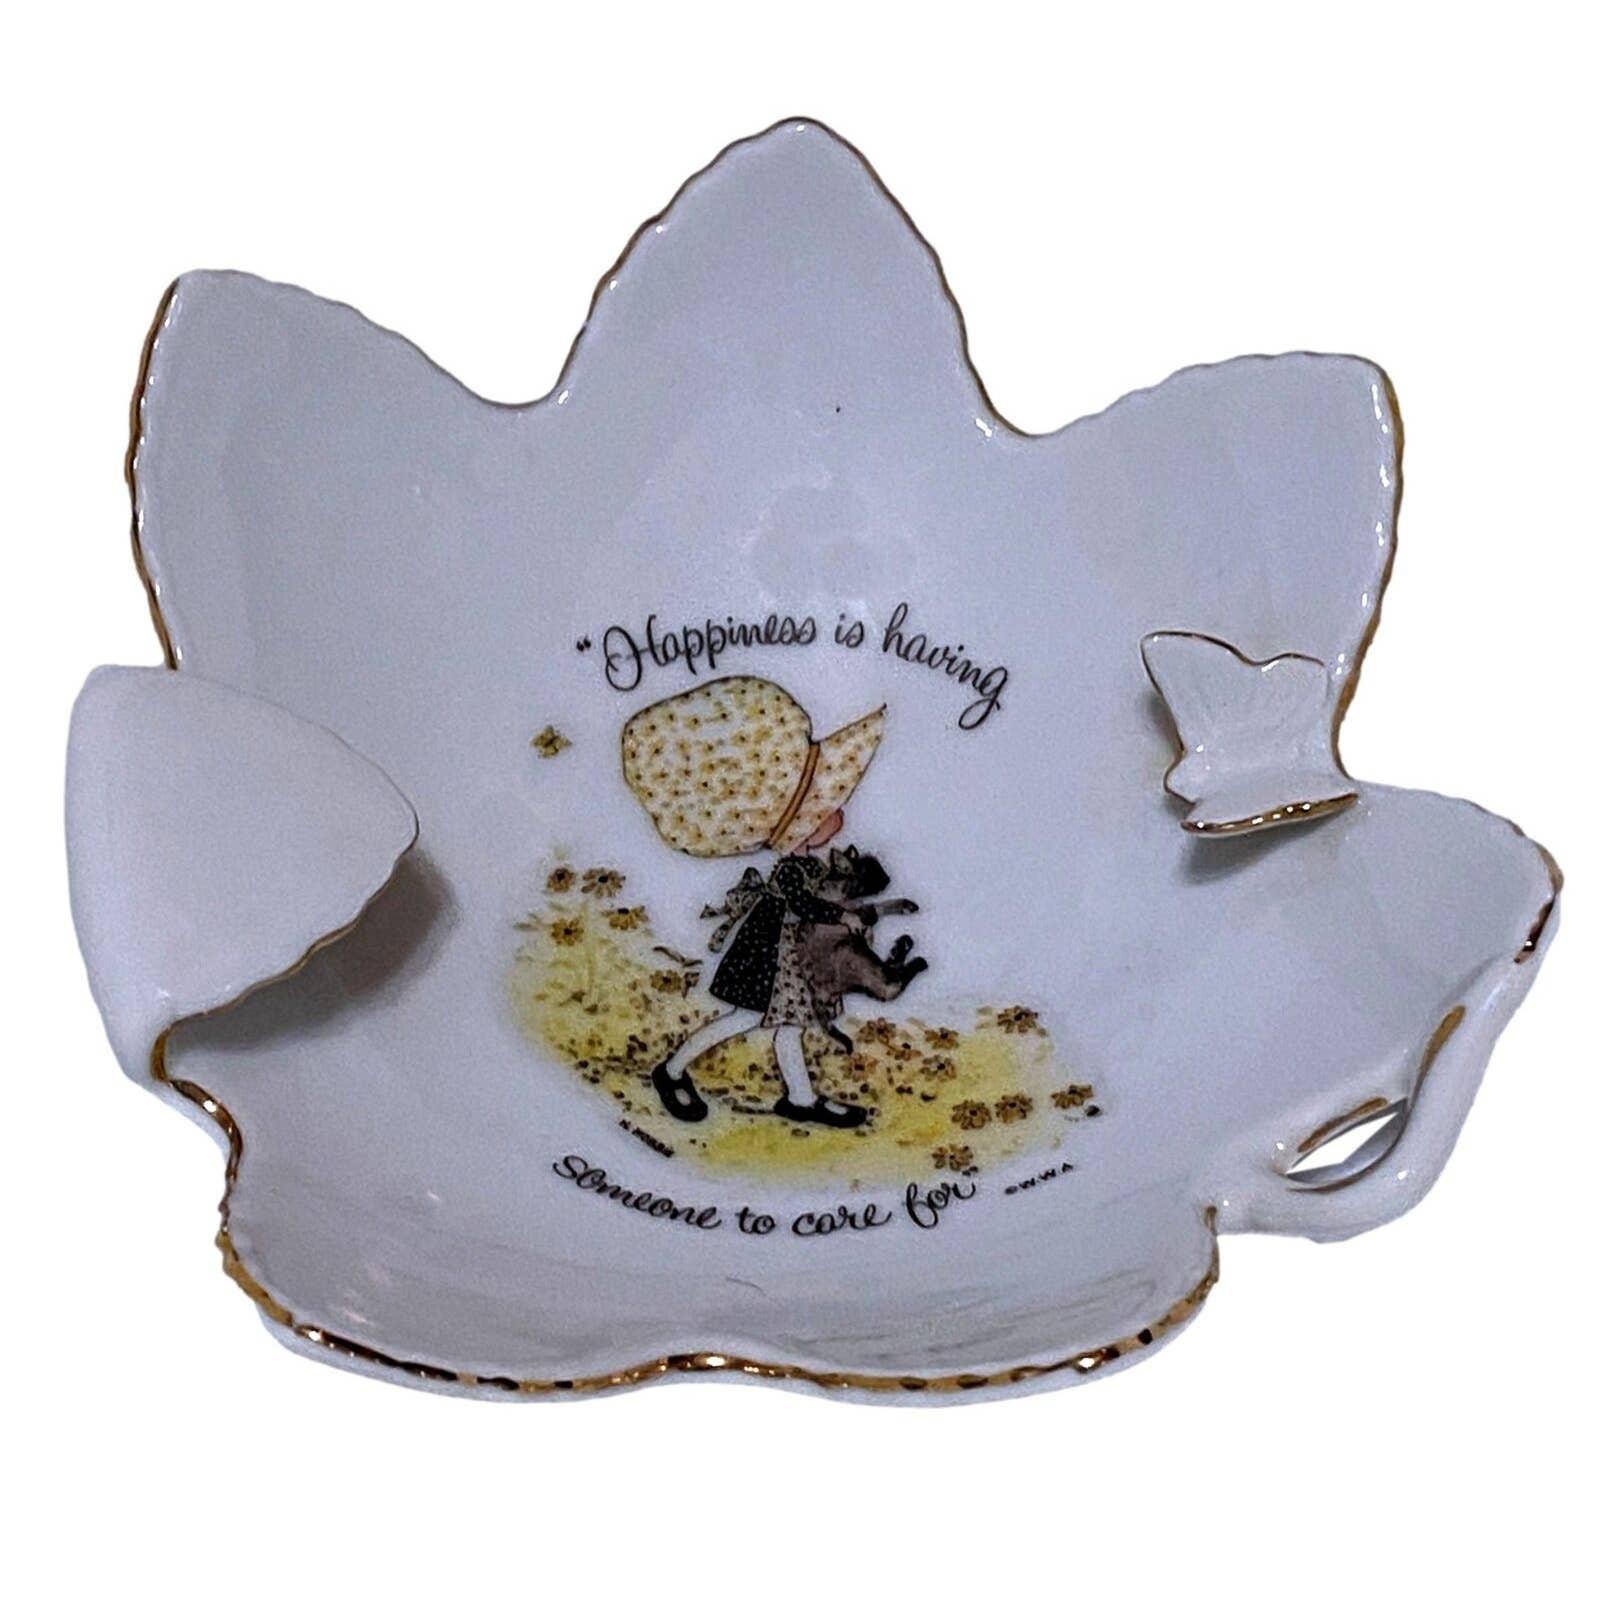 1973 HOLLY HOBBIE w Cat Candy Trinket Dish Vintage Porcelain Happiness is Having